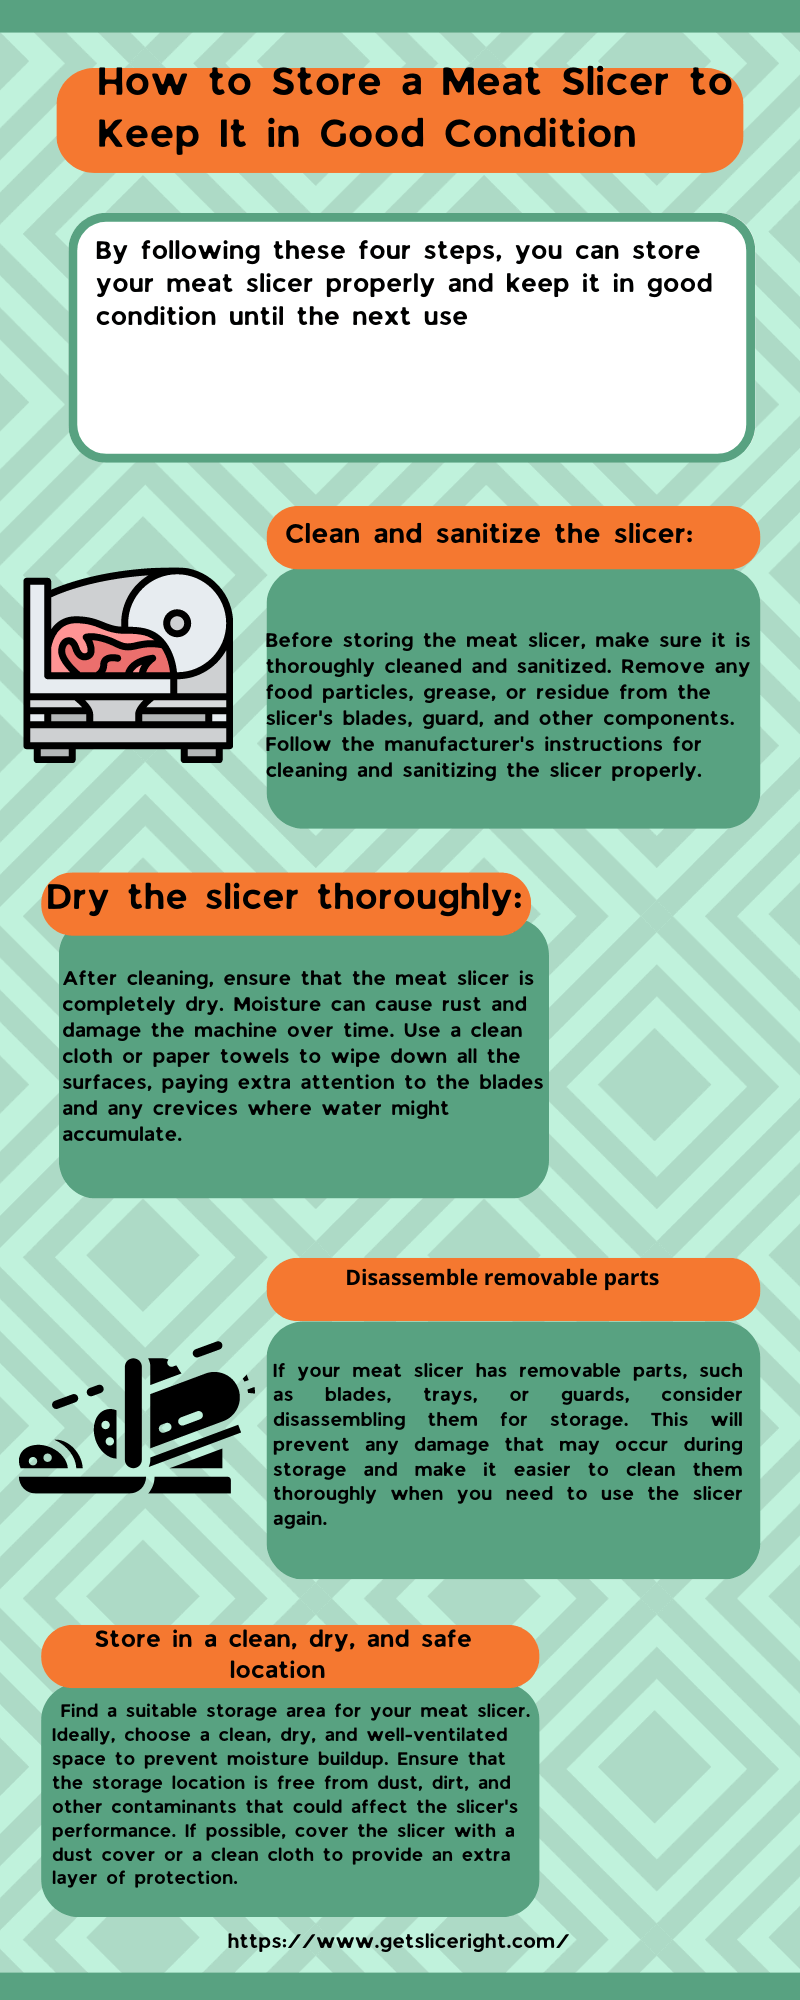 How to store meat slicer - getsliceright infographic